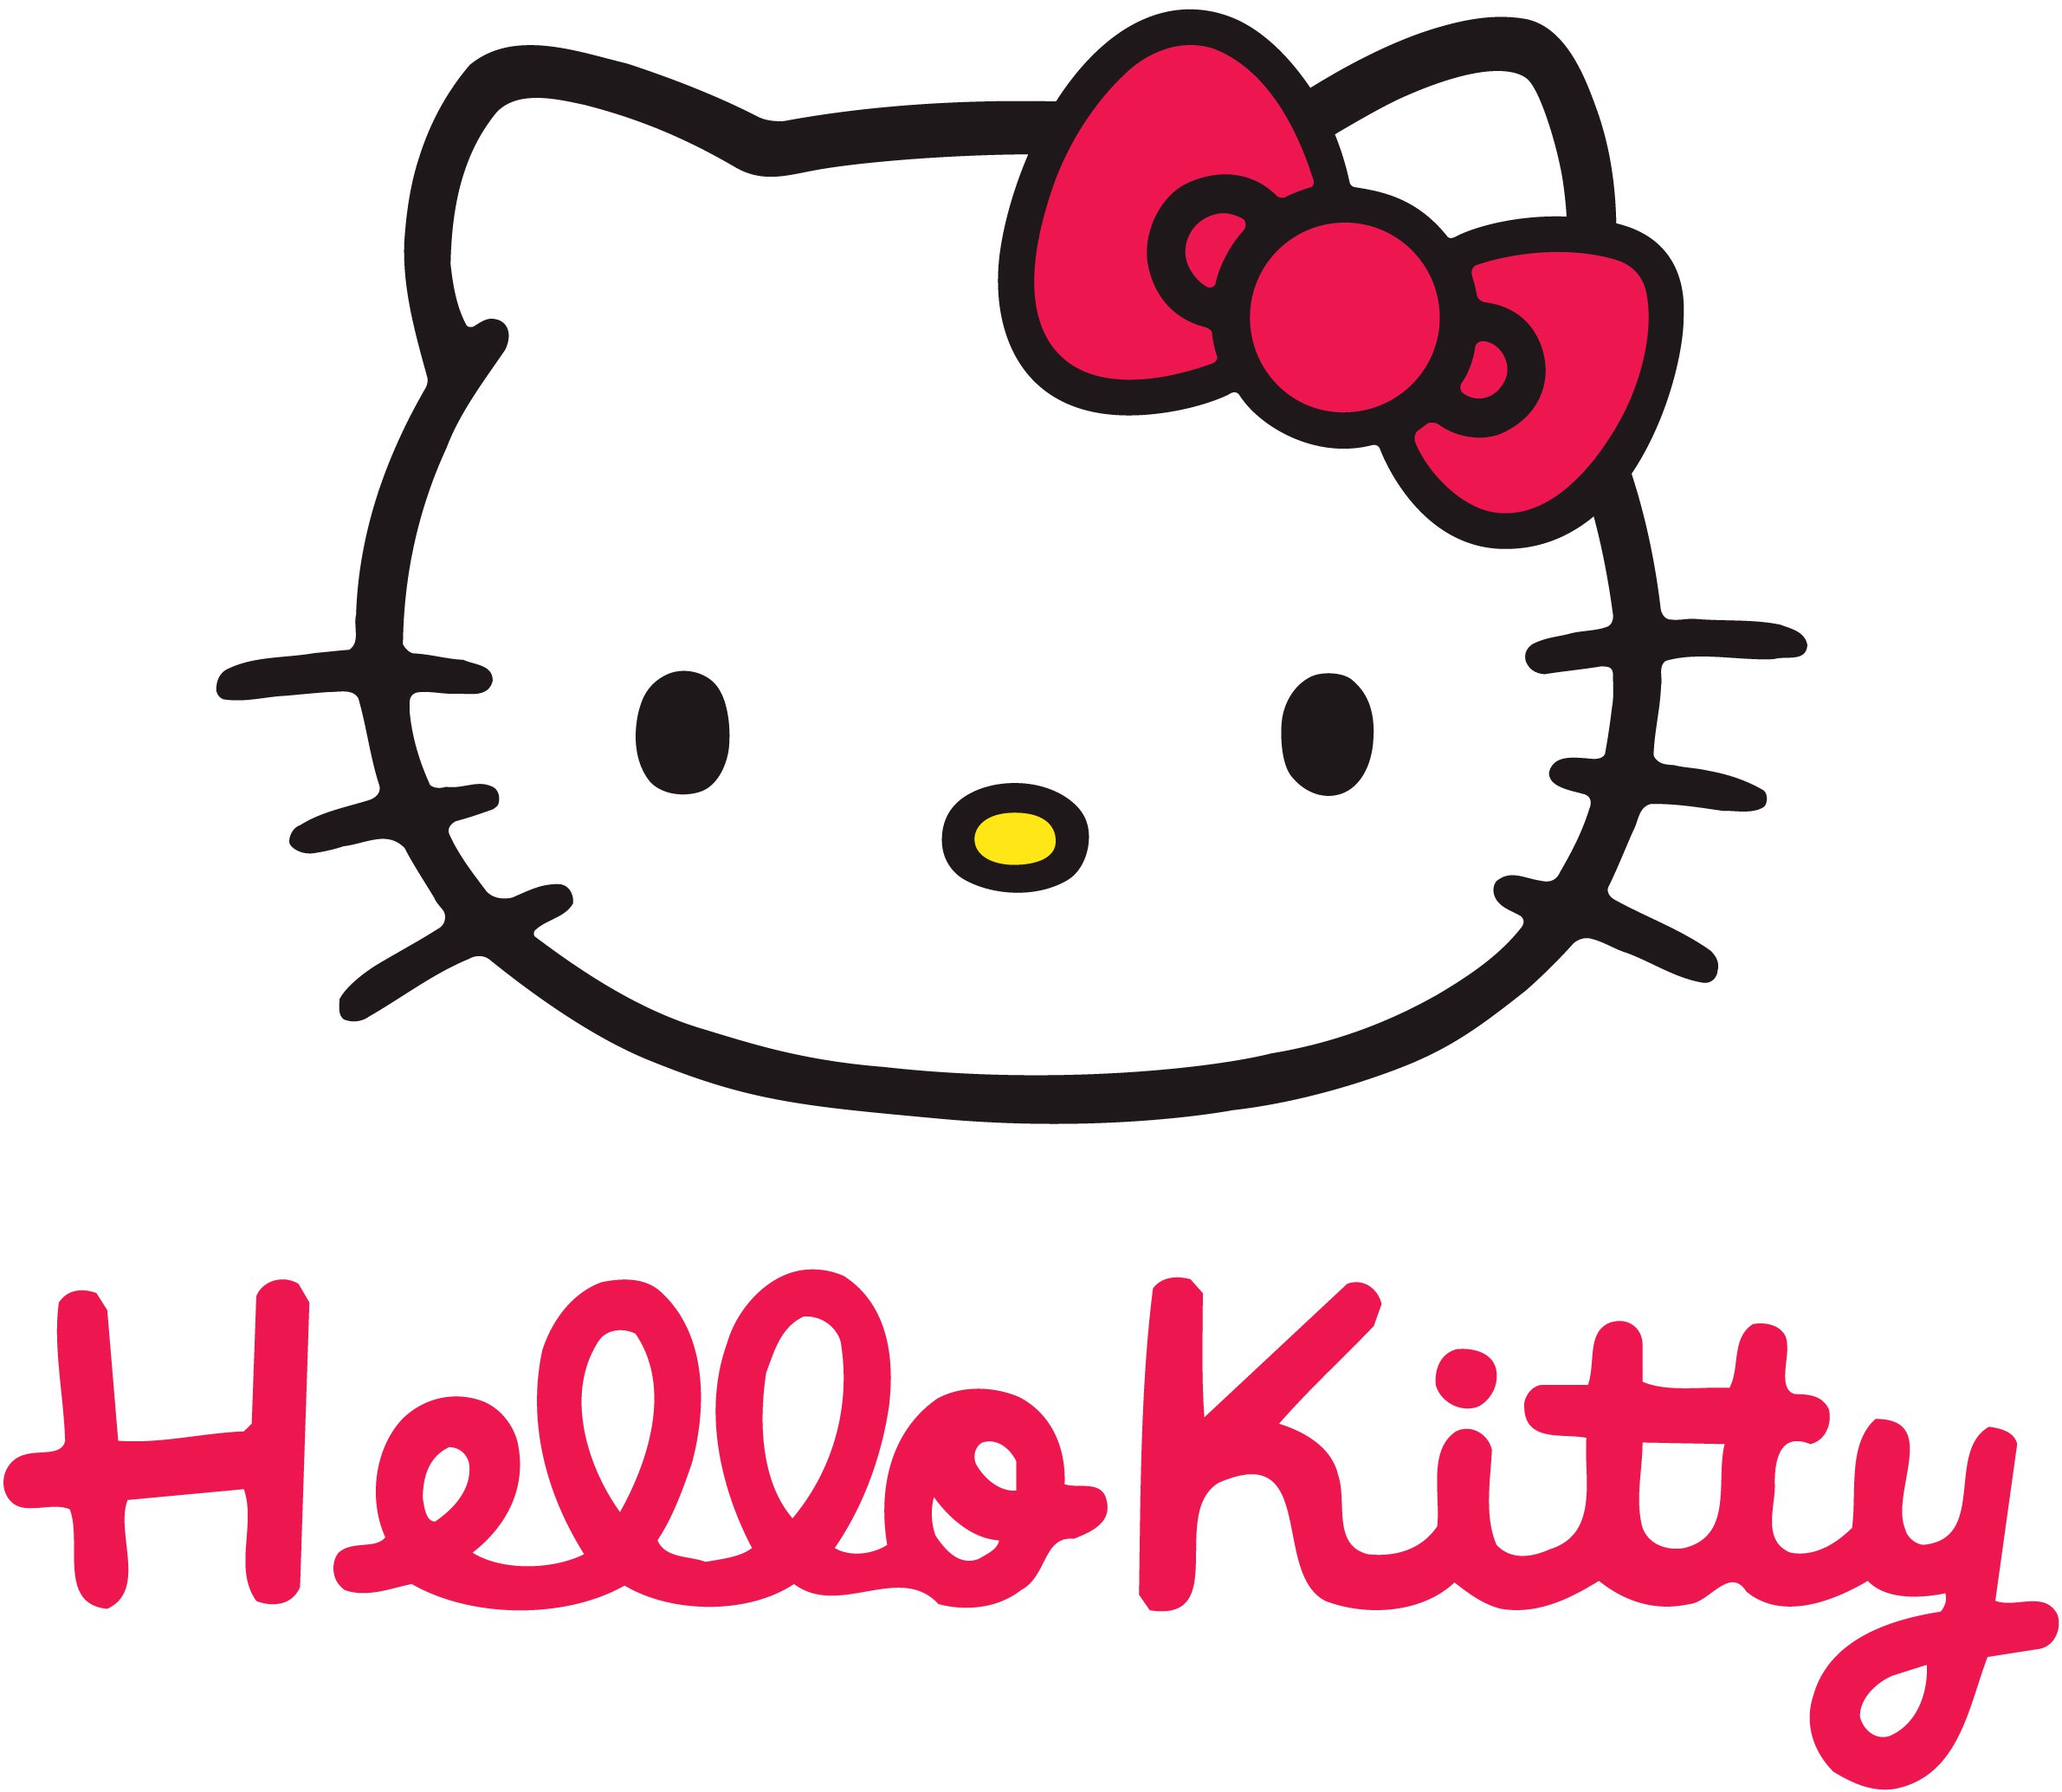 Nice Images Collection: Hello Kitty Desktop Wallpapers